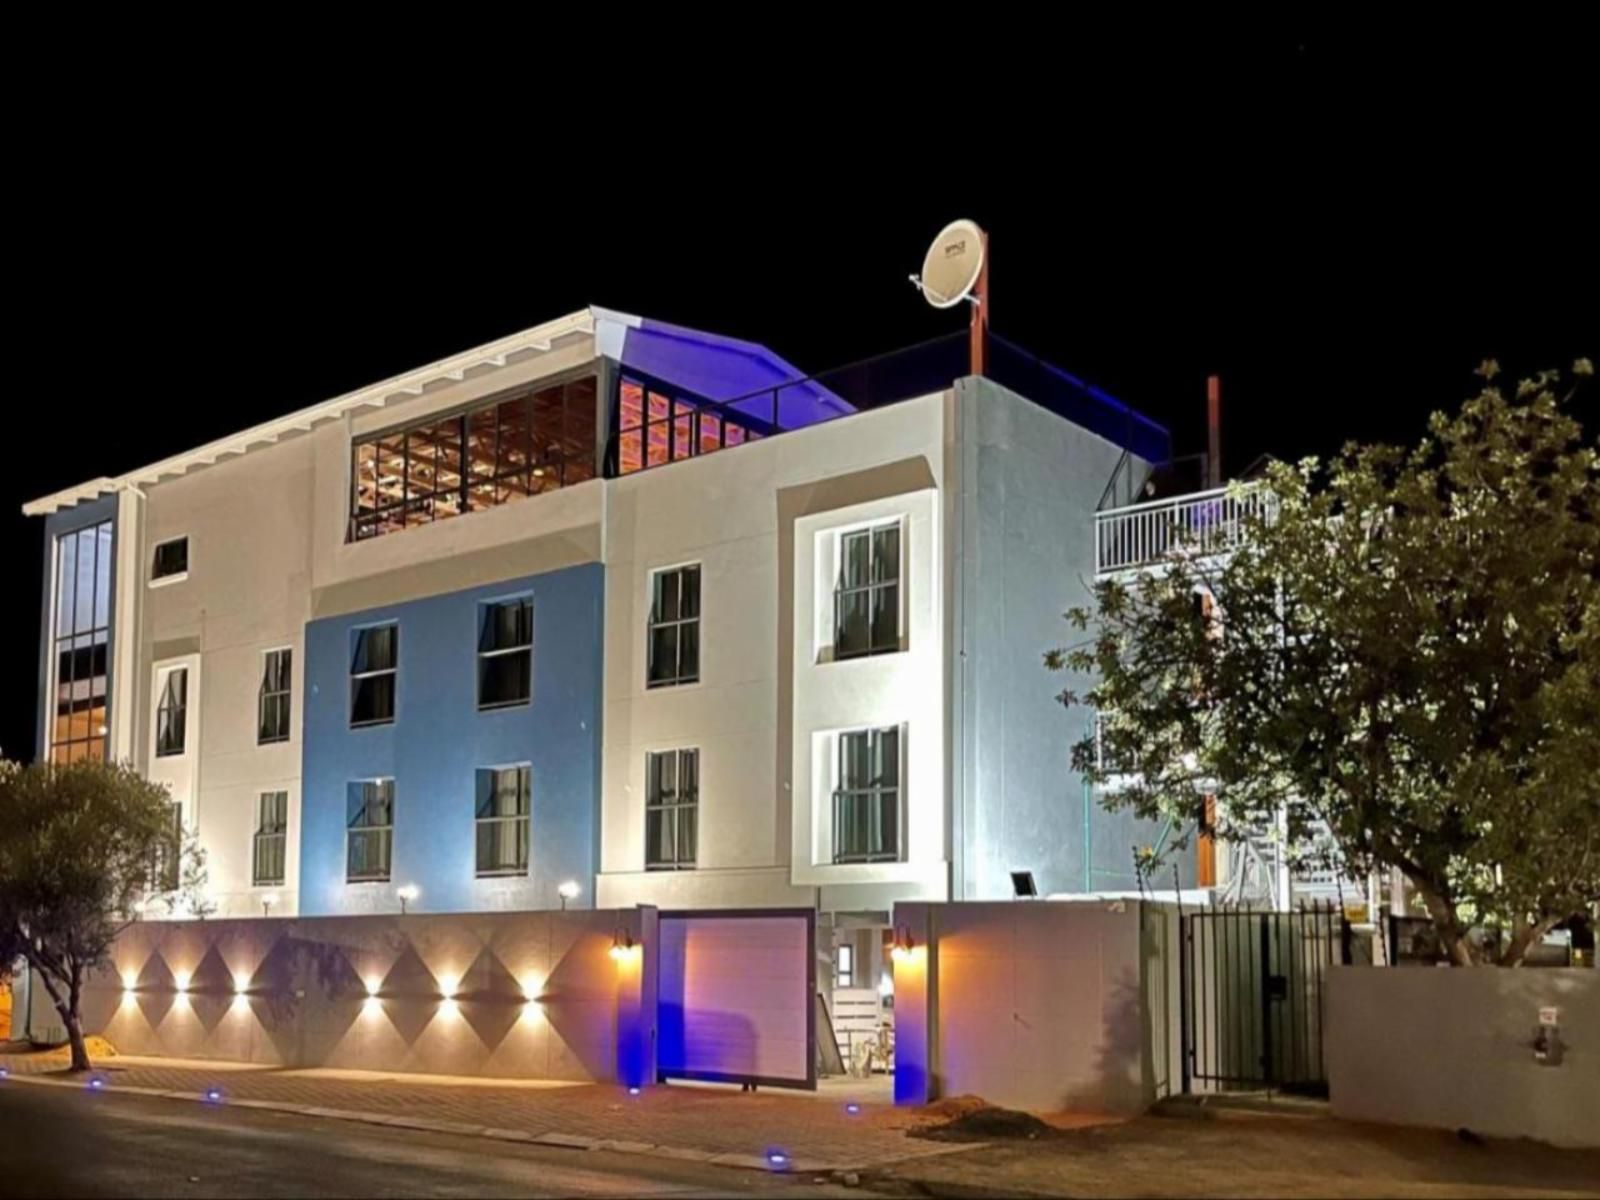 Nare Boutique Hotel Kimberley Northern Cape South Africa House, Building, Architecture, Window